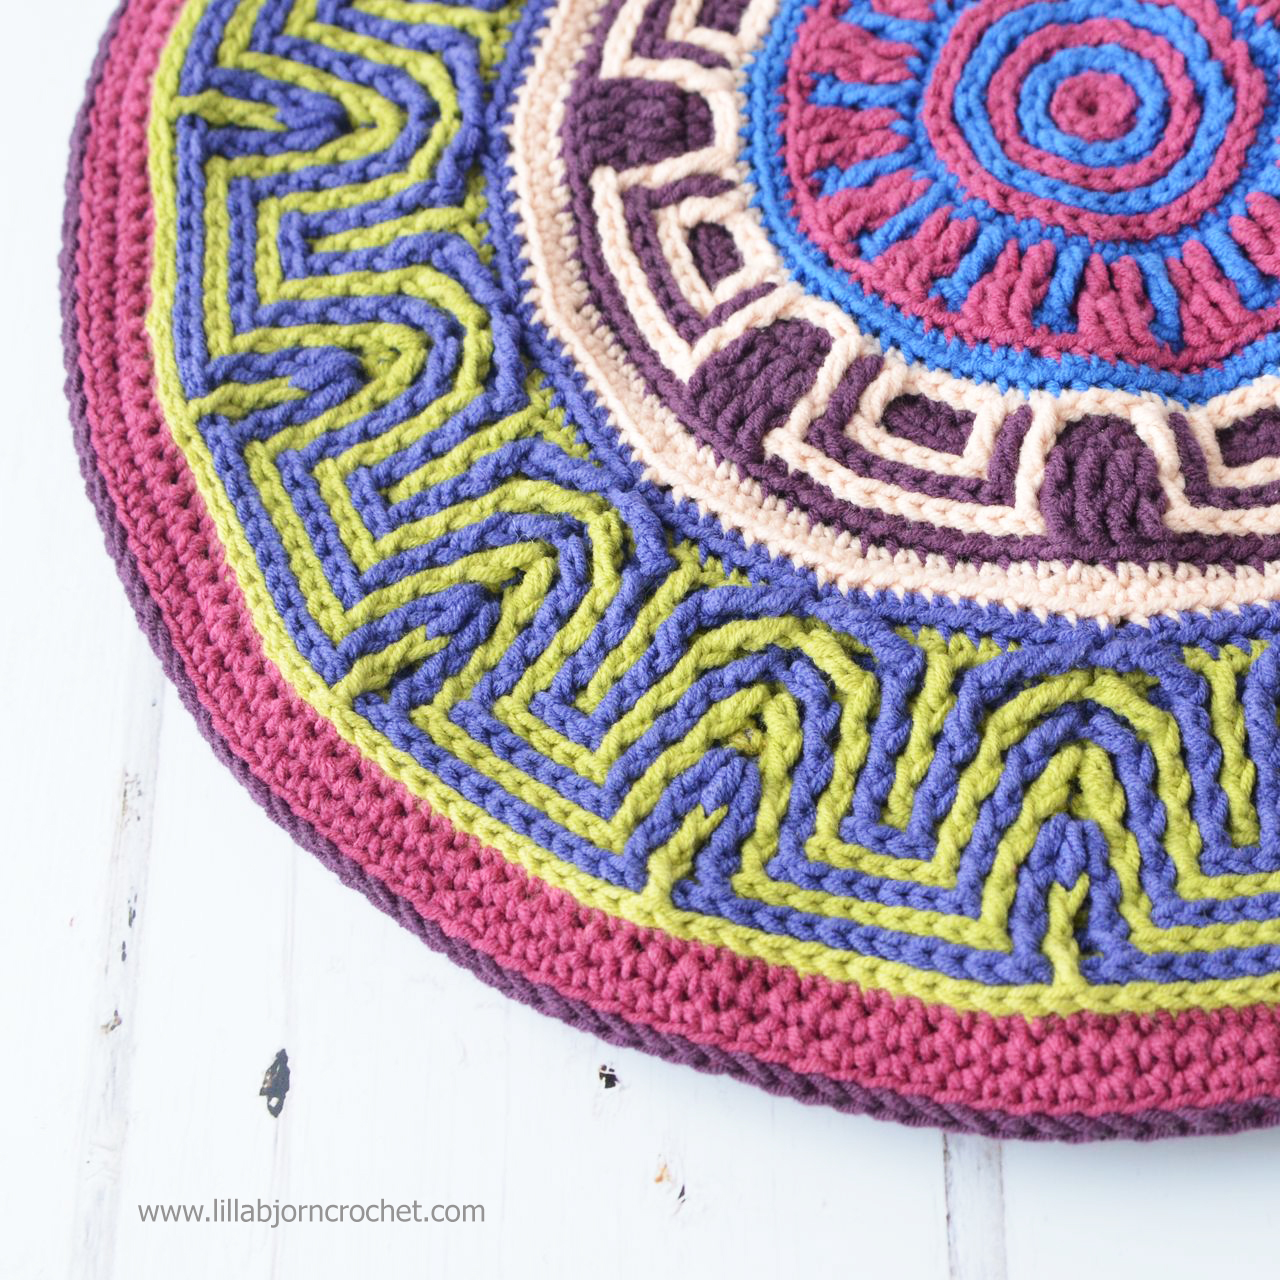 Download Welcome to My Labyrinth: new overlay crochet design ...